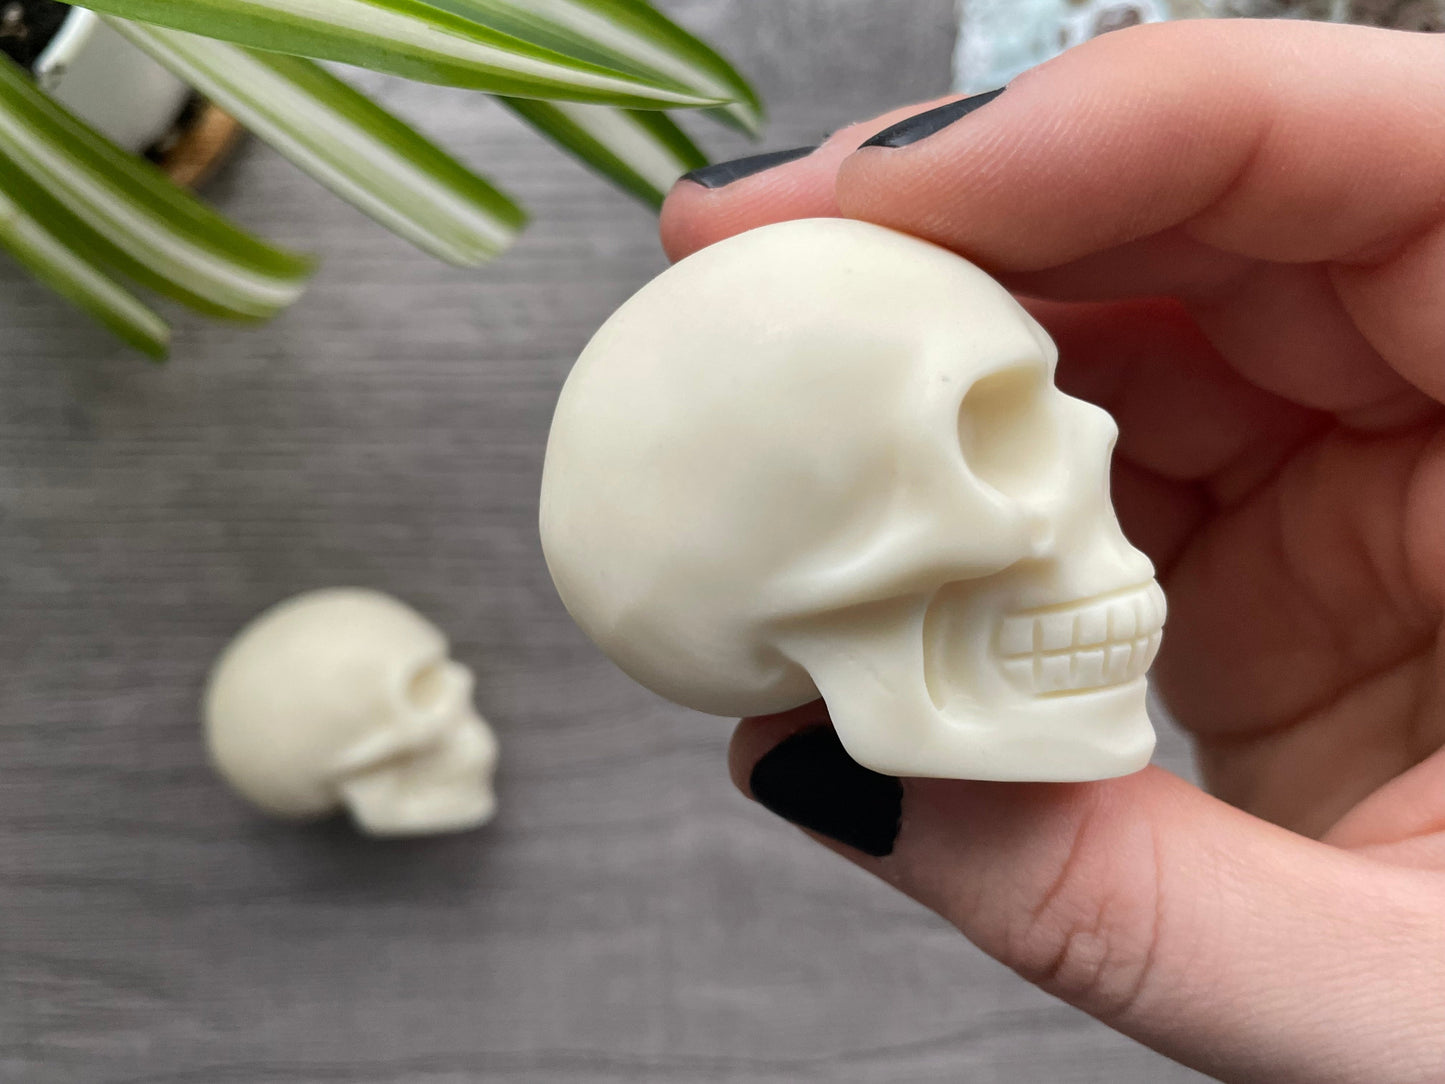 Pictured are various skulls carved out of tagua nut.